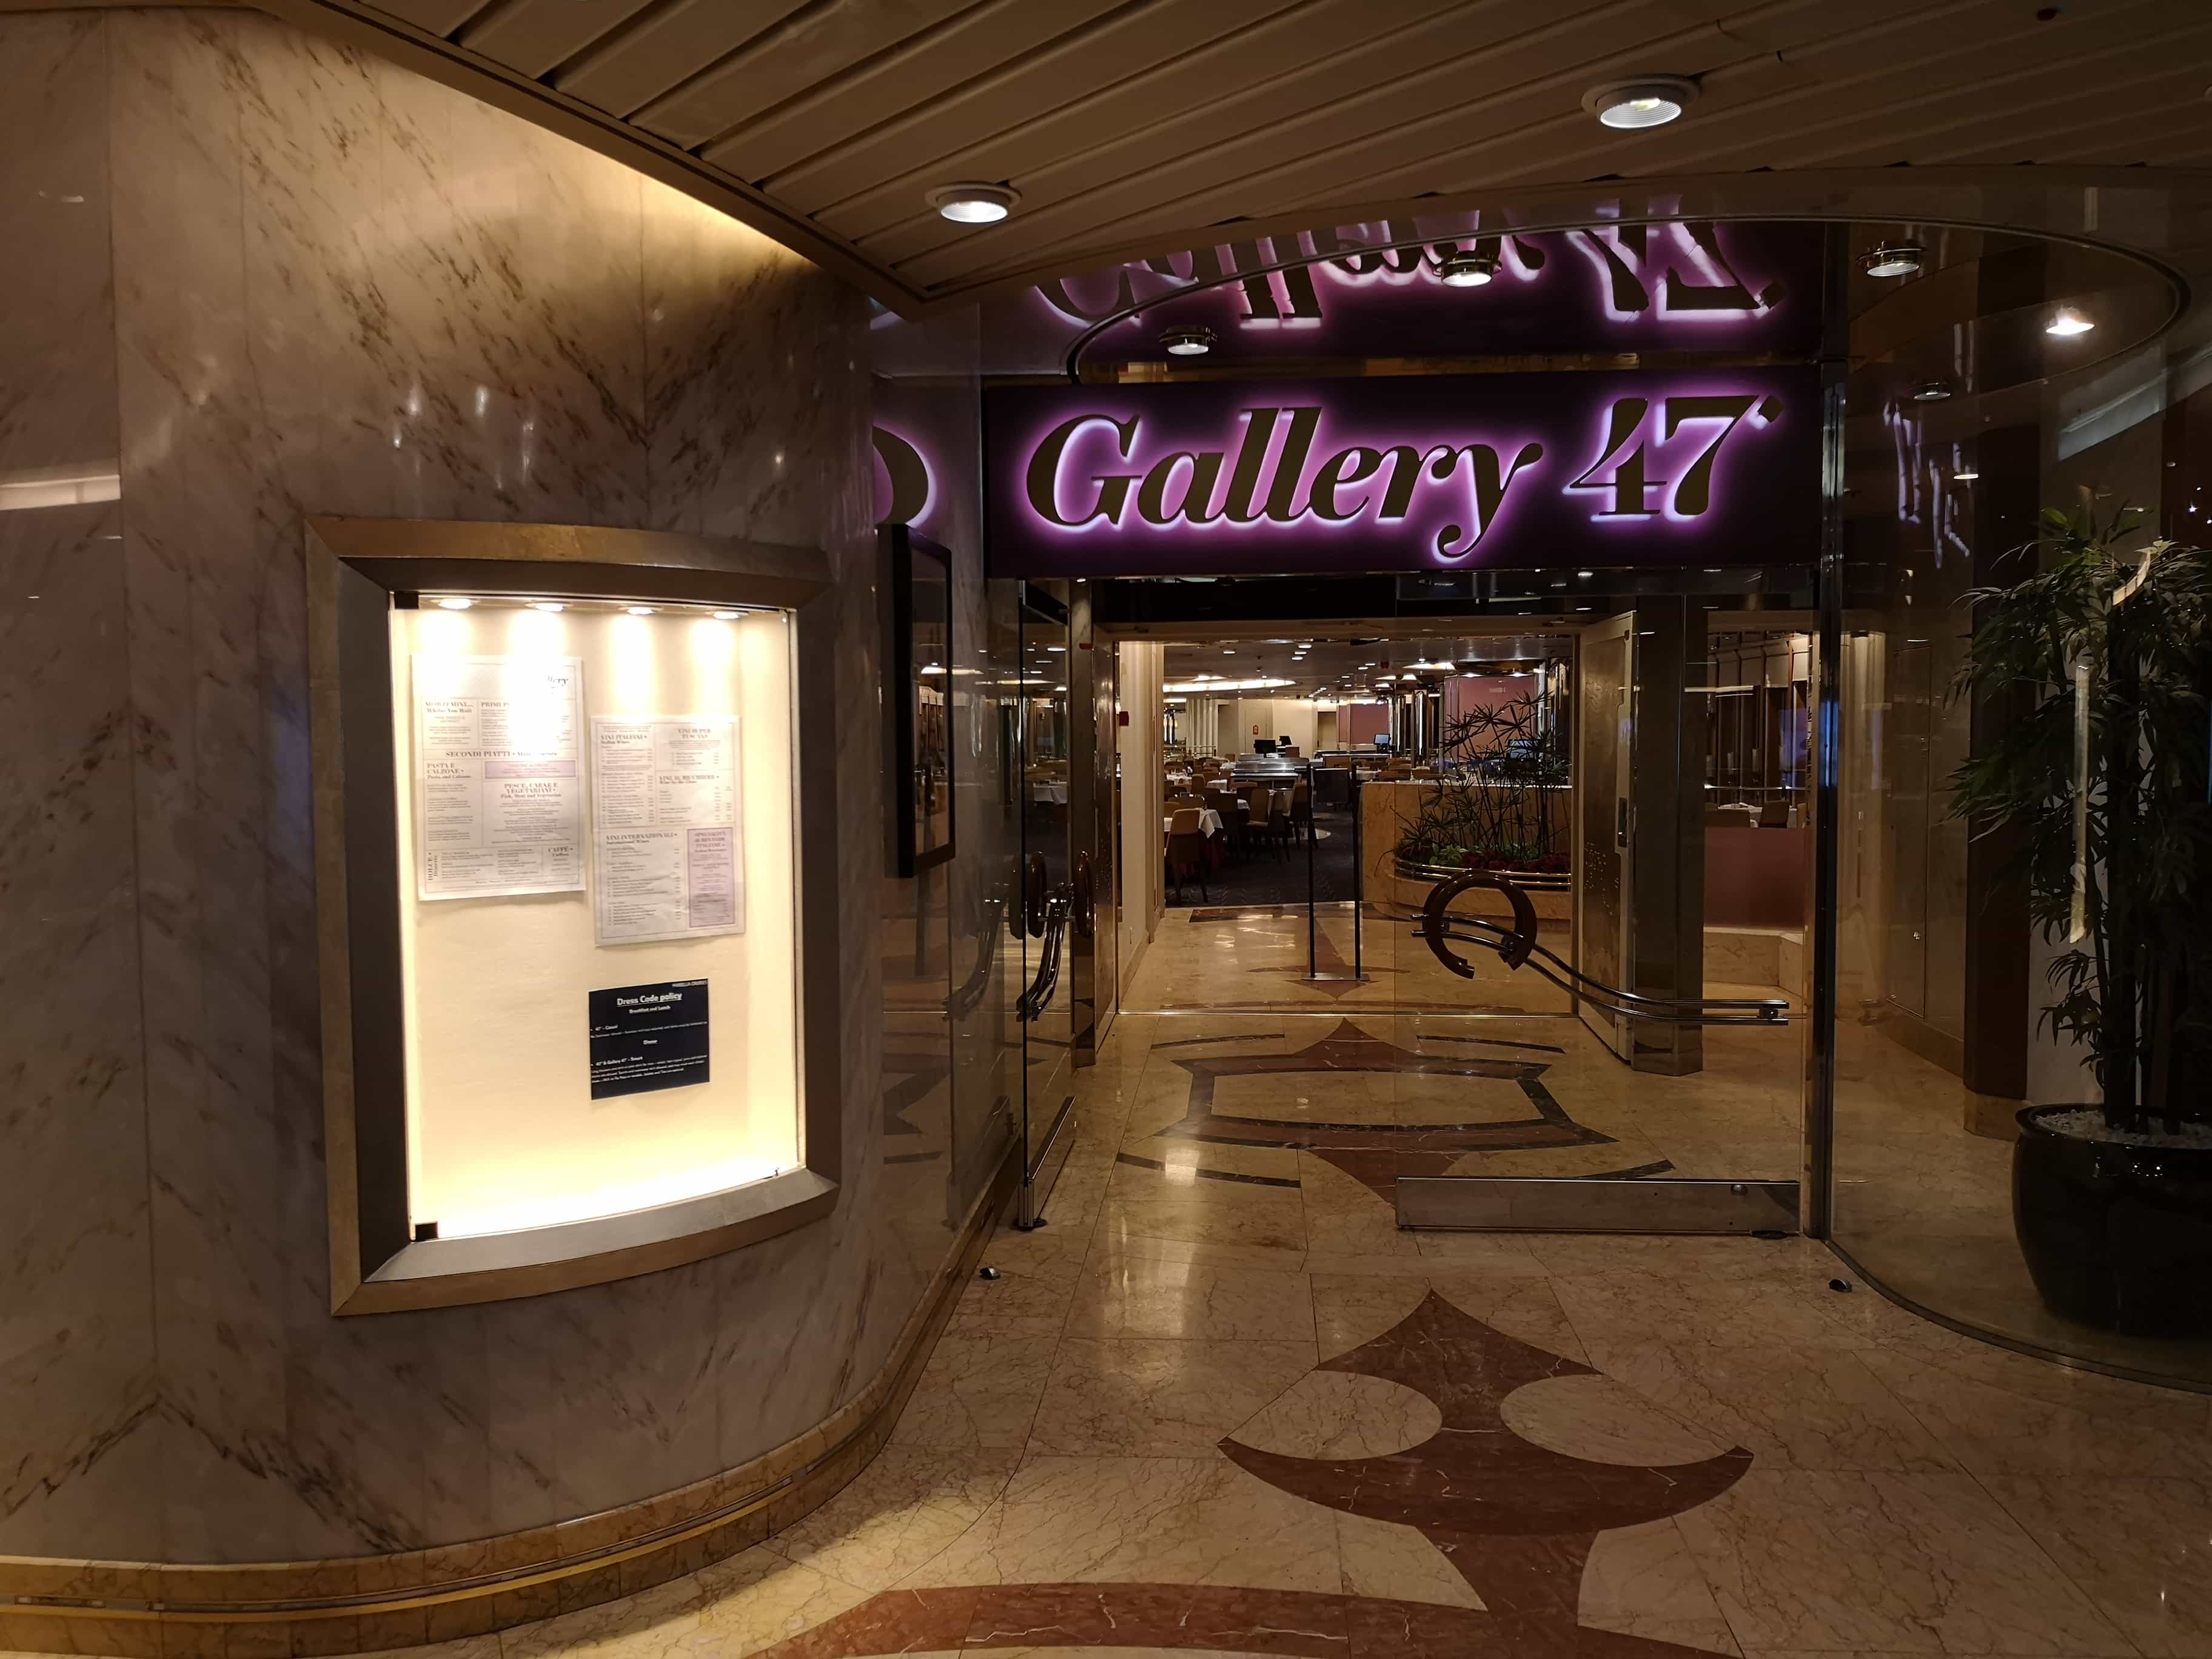 Marella Cruises Discovery Main Dining Room Gallery 47°